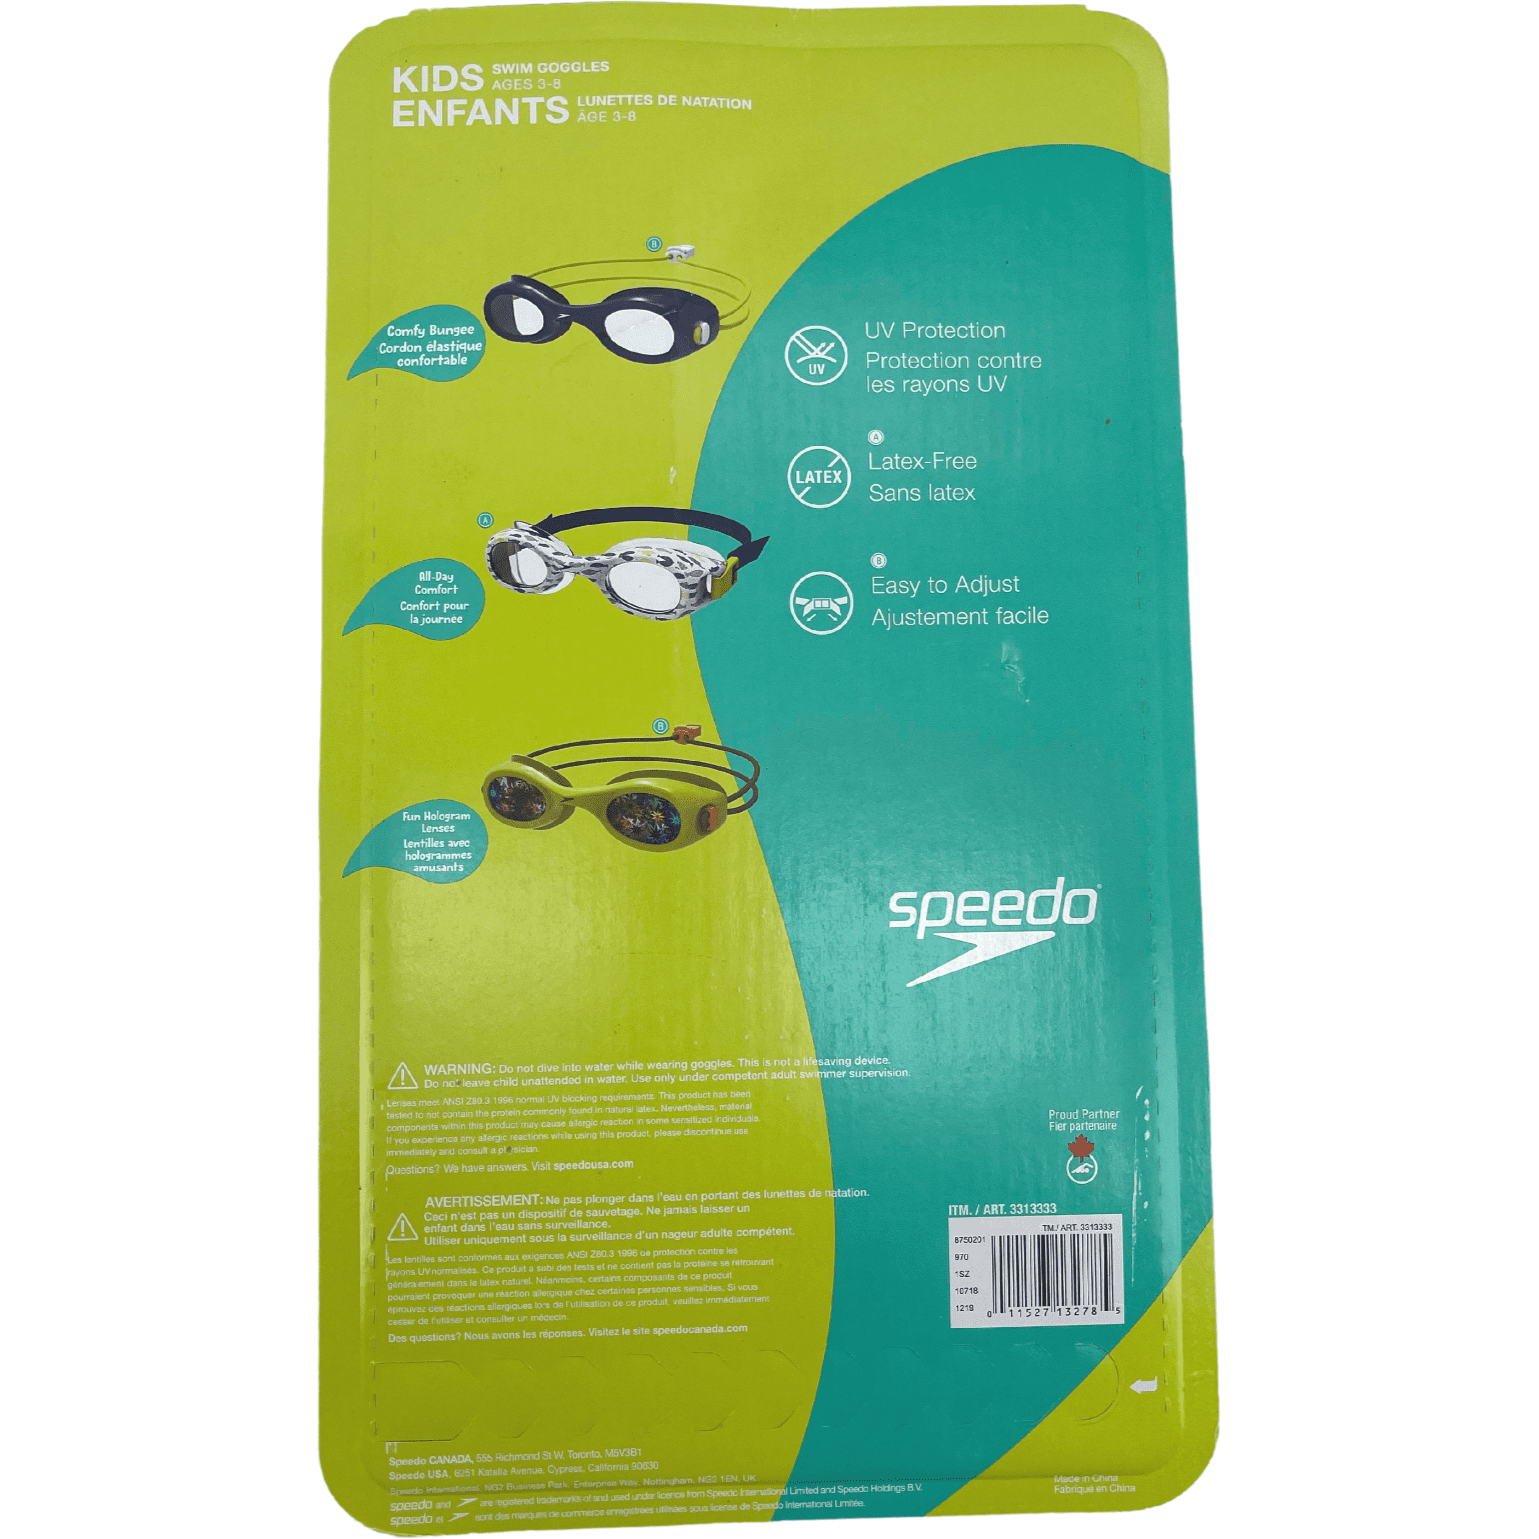 Speedo Kids's Swimming Goggles / 3 Pack / Latex Free / Ages 3-8 **DEALS**